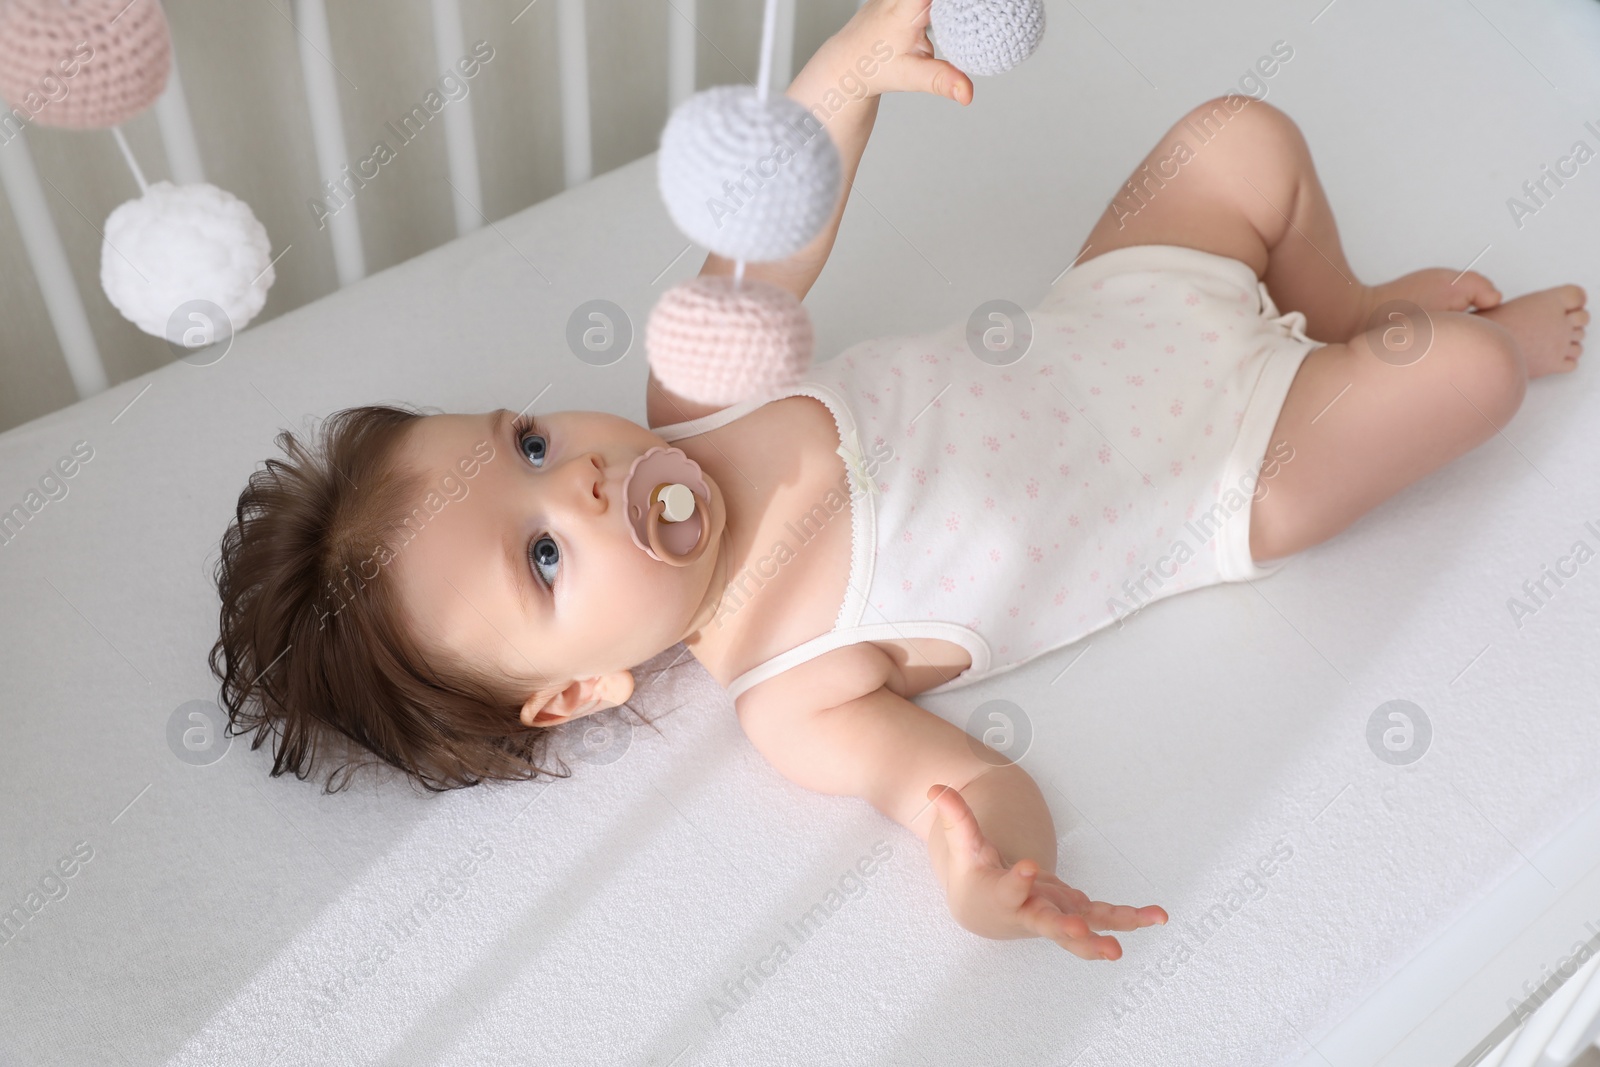 Photo of Cute little baby looking at hanging mobile in crib